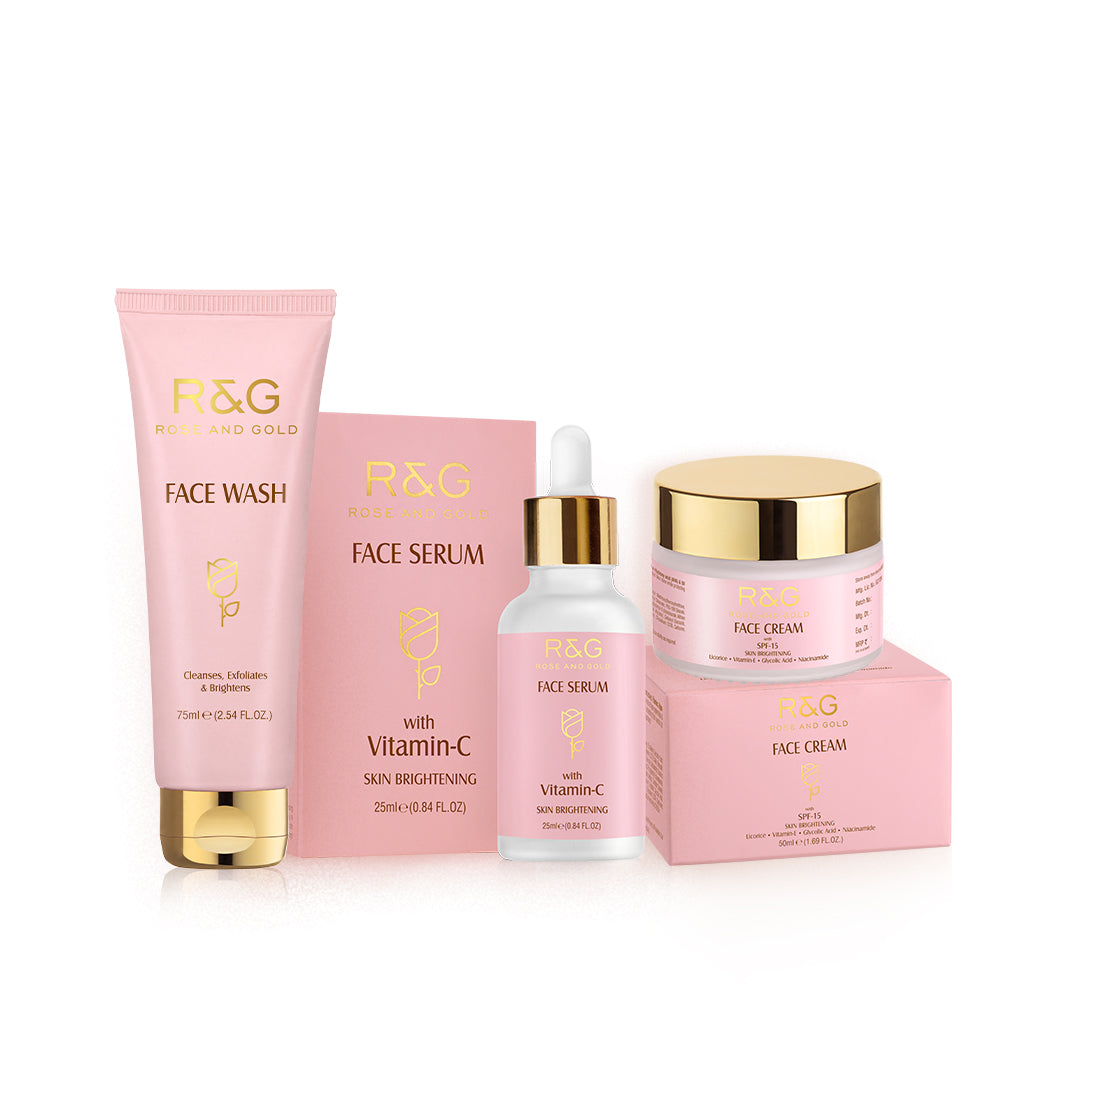 R&G Face Brightening Kit - Fades Dark Spots, Reduces Hyperpigmentation, Evens Skin Tone & Helps to Promote a Radiant, Brighter & Youthful Appearance of Your Skin